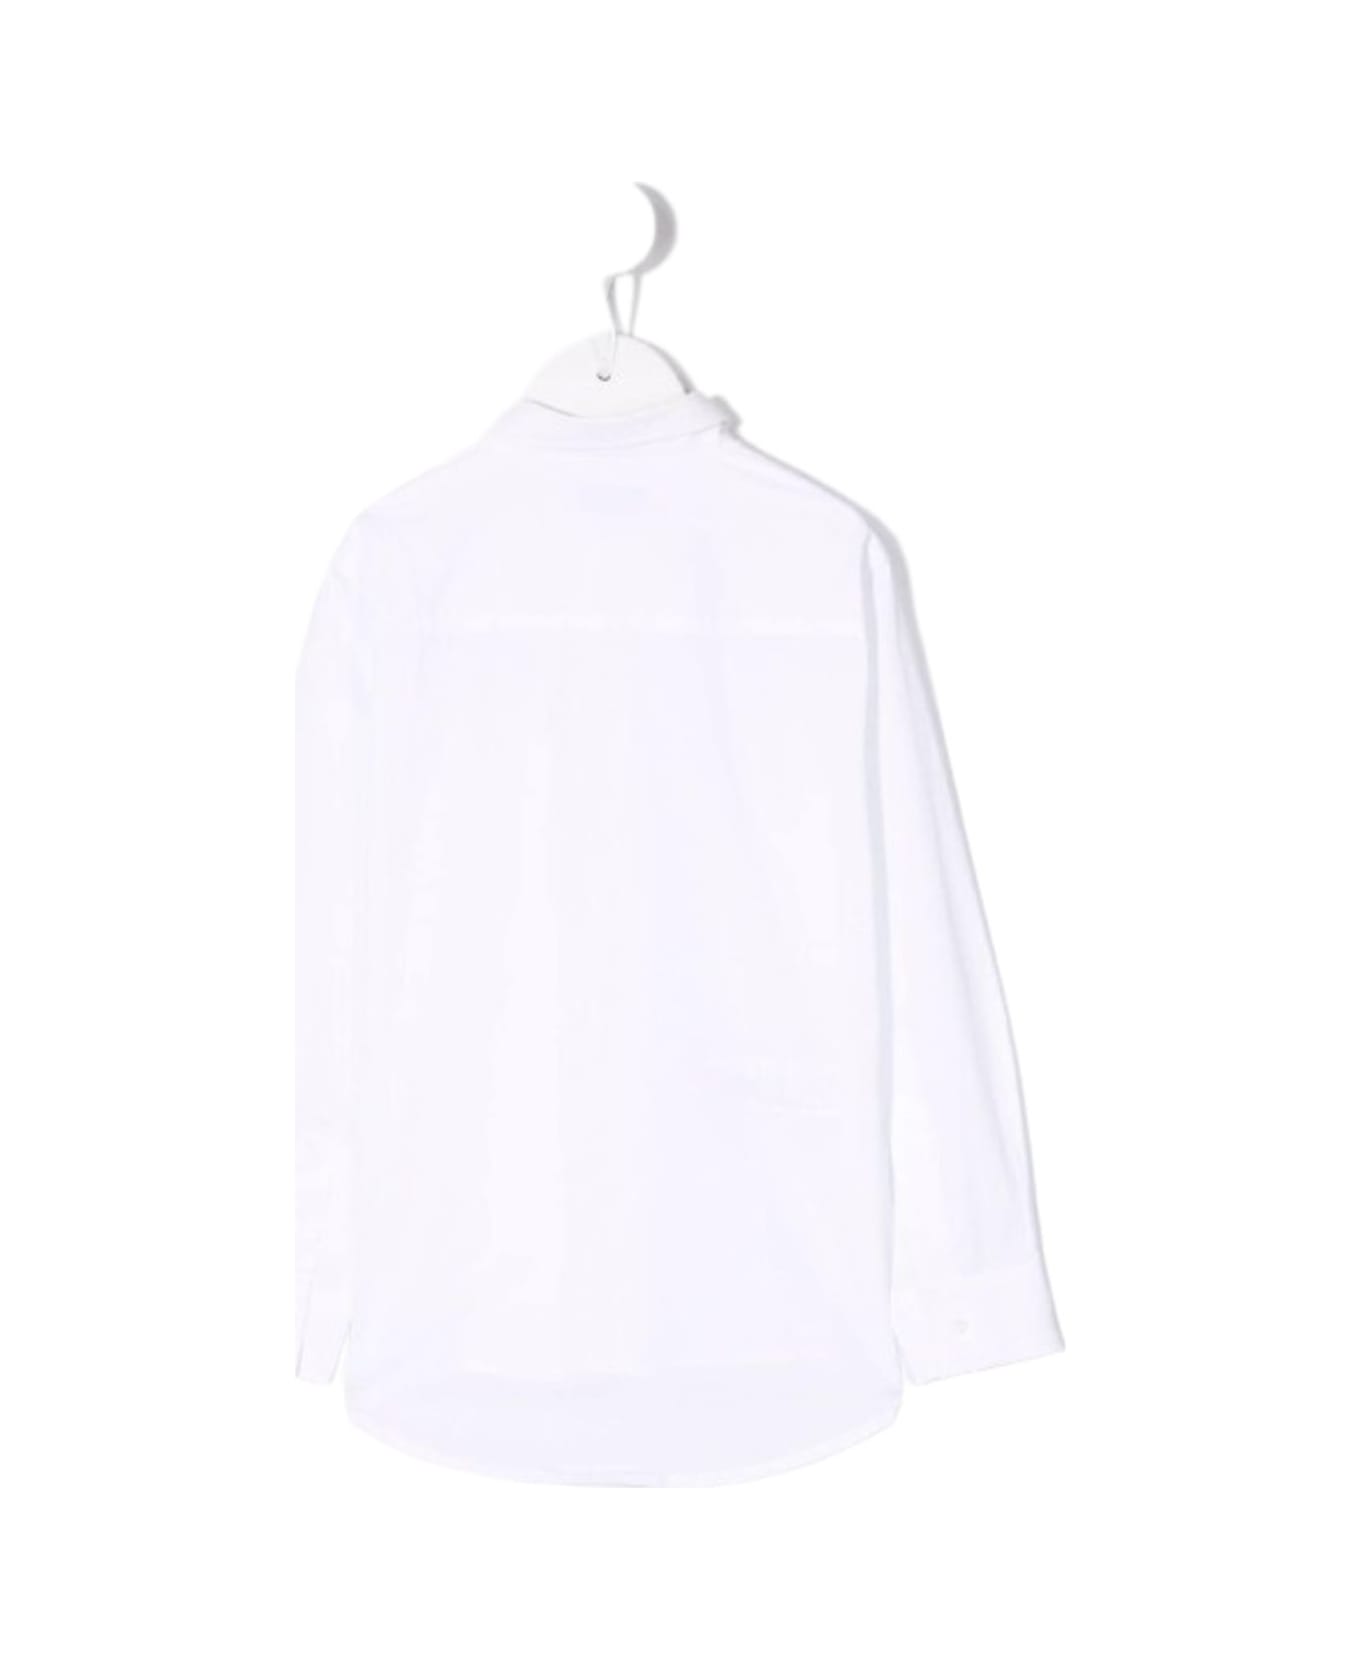 Il Gufo White Shirt With Patch Pocket On The Chest In Cotton Boy - Bianco シャツ